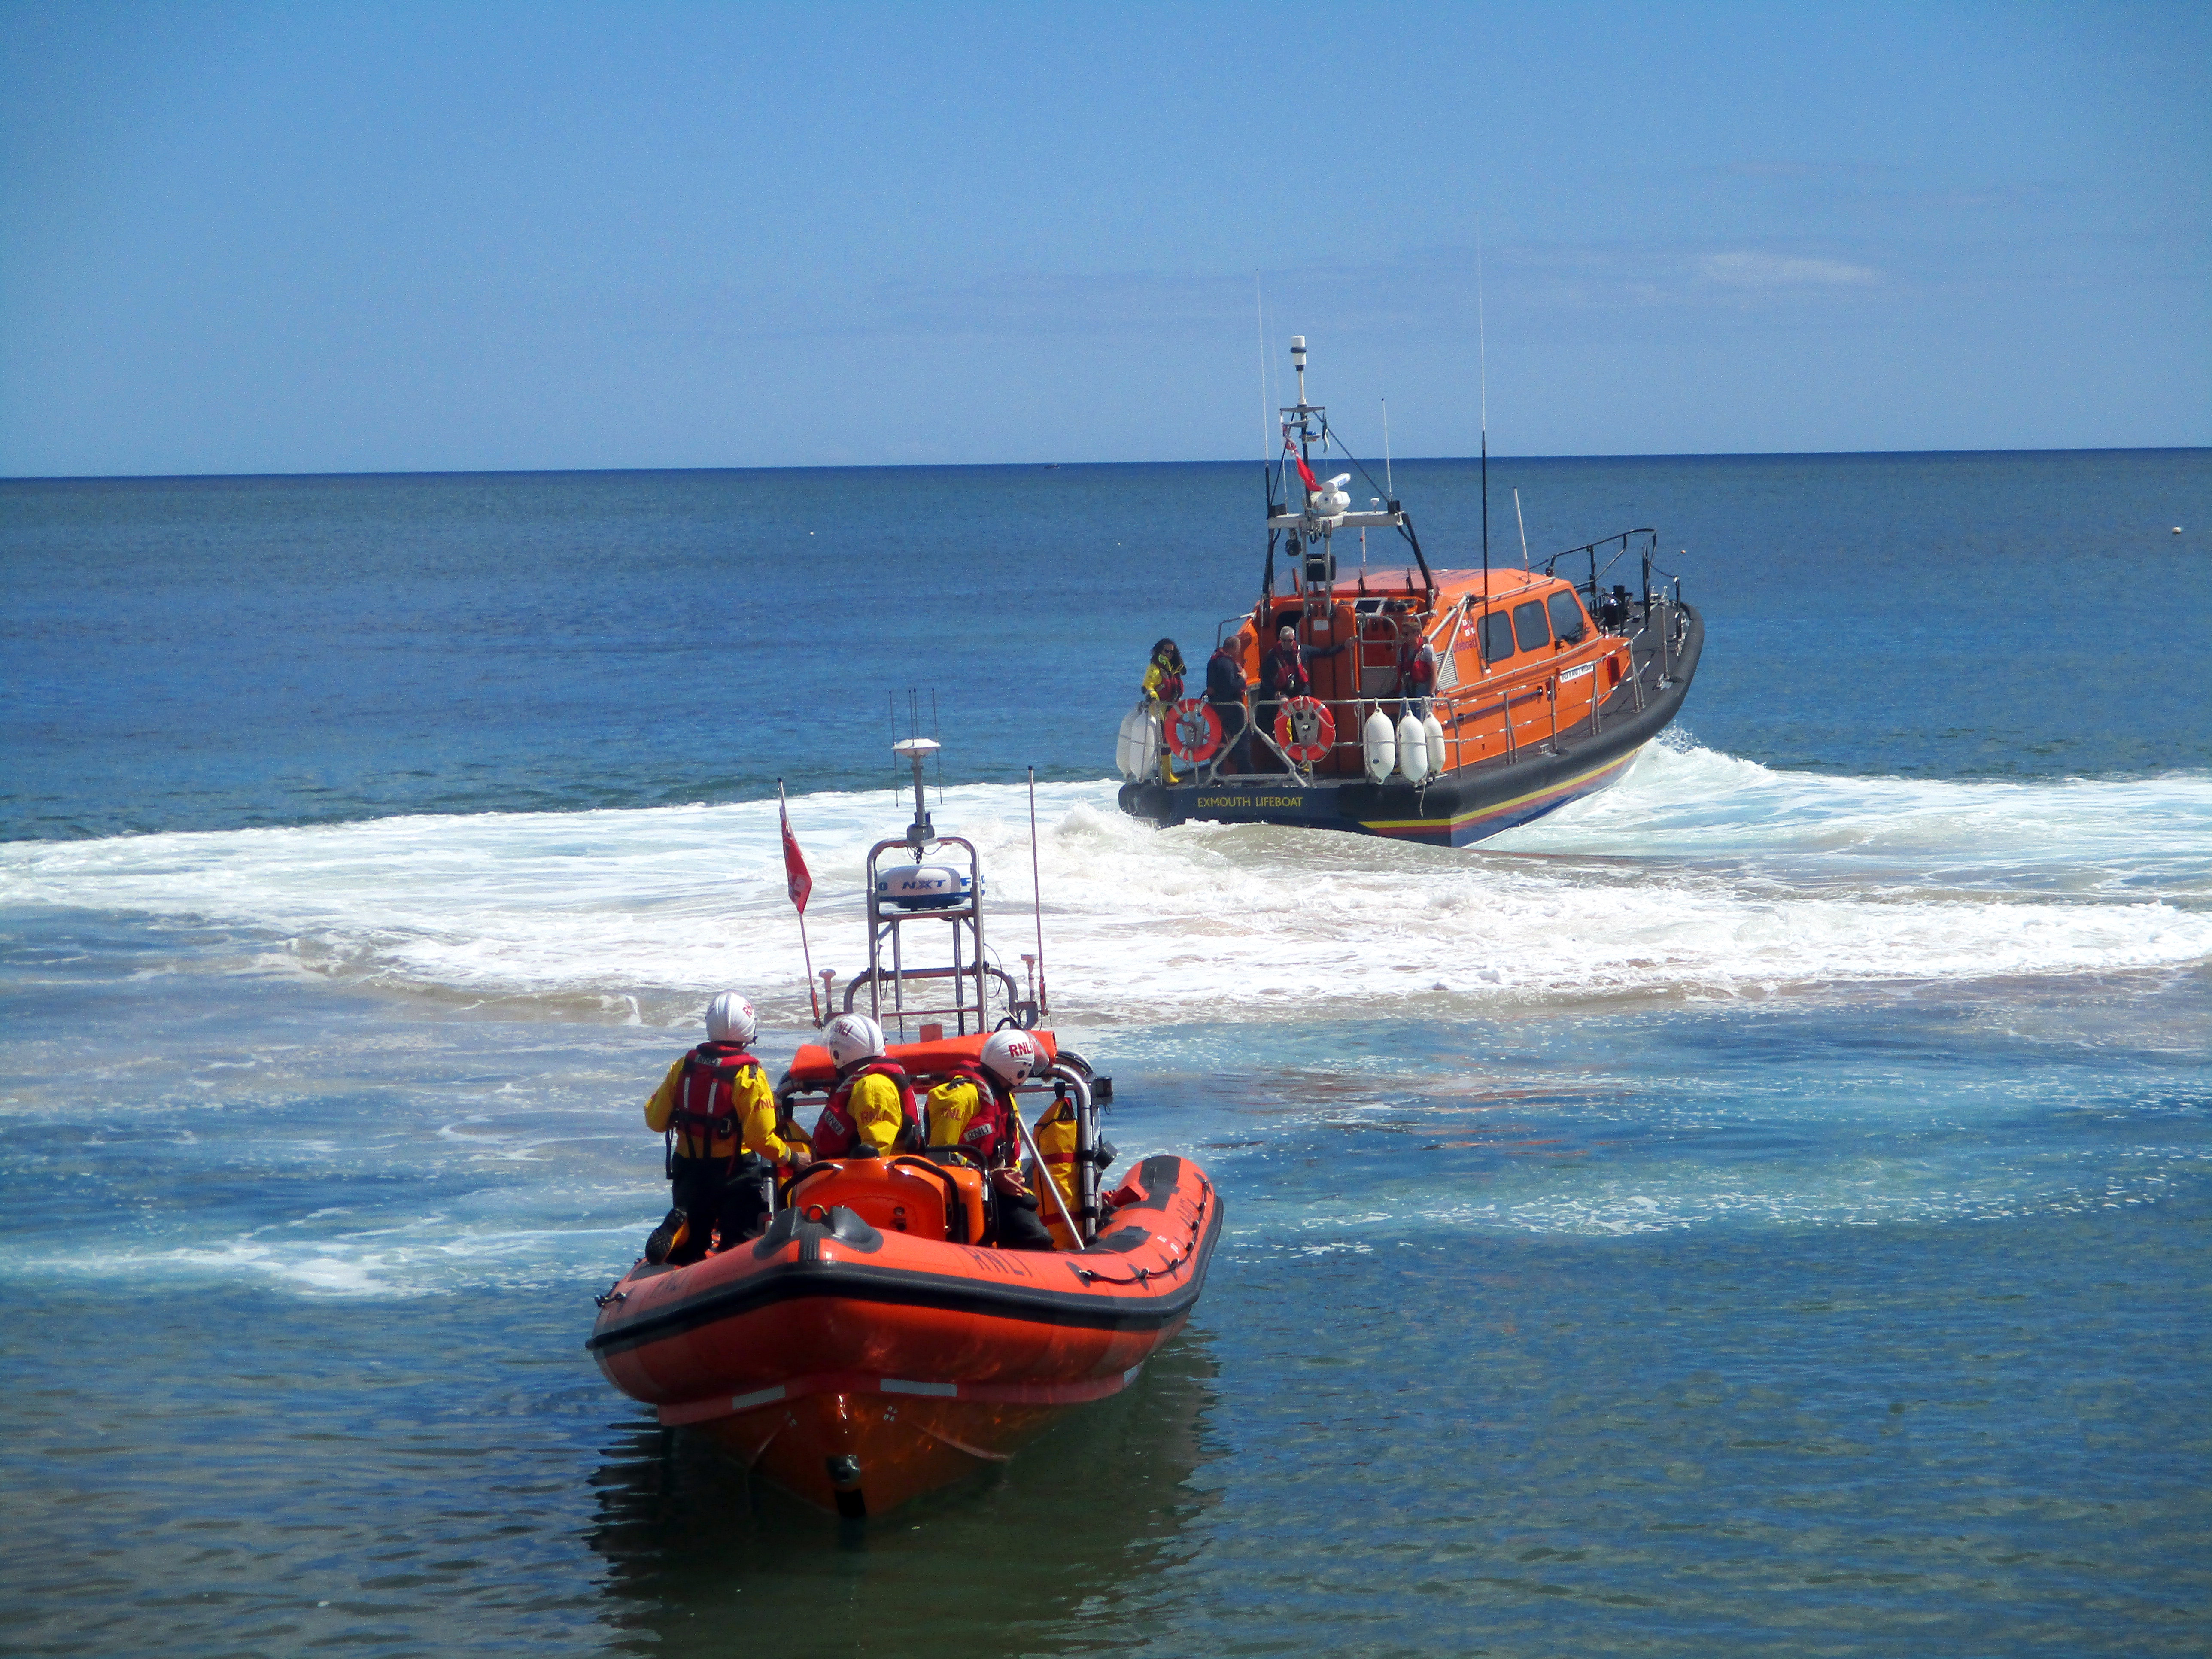 Lyme Regis and Exmouth lifeboat crews will give a display for Beer Lifeboat Weekend